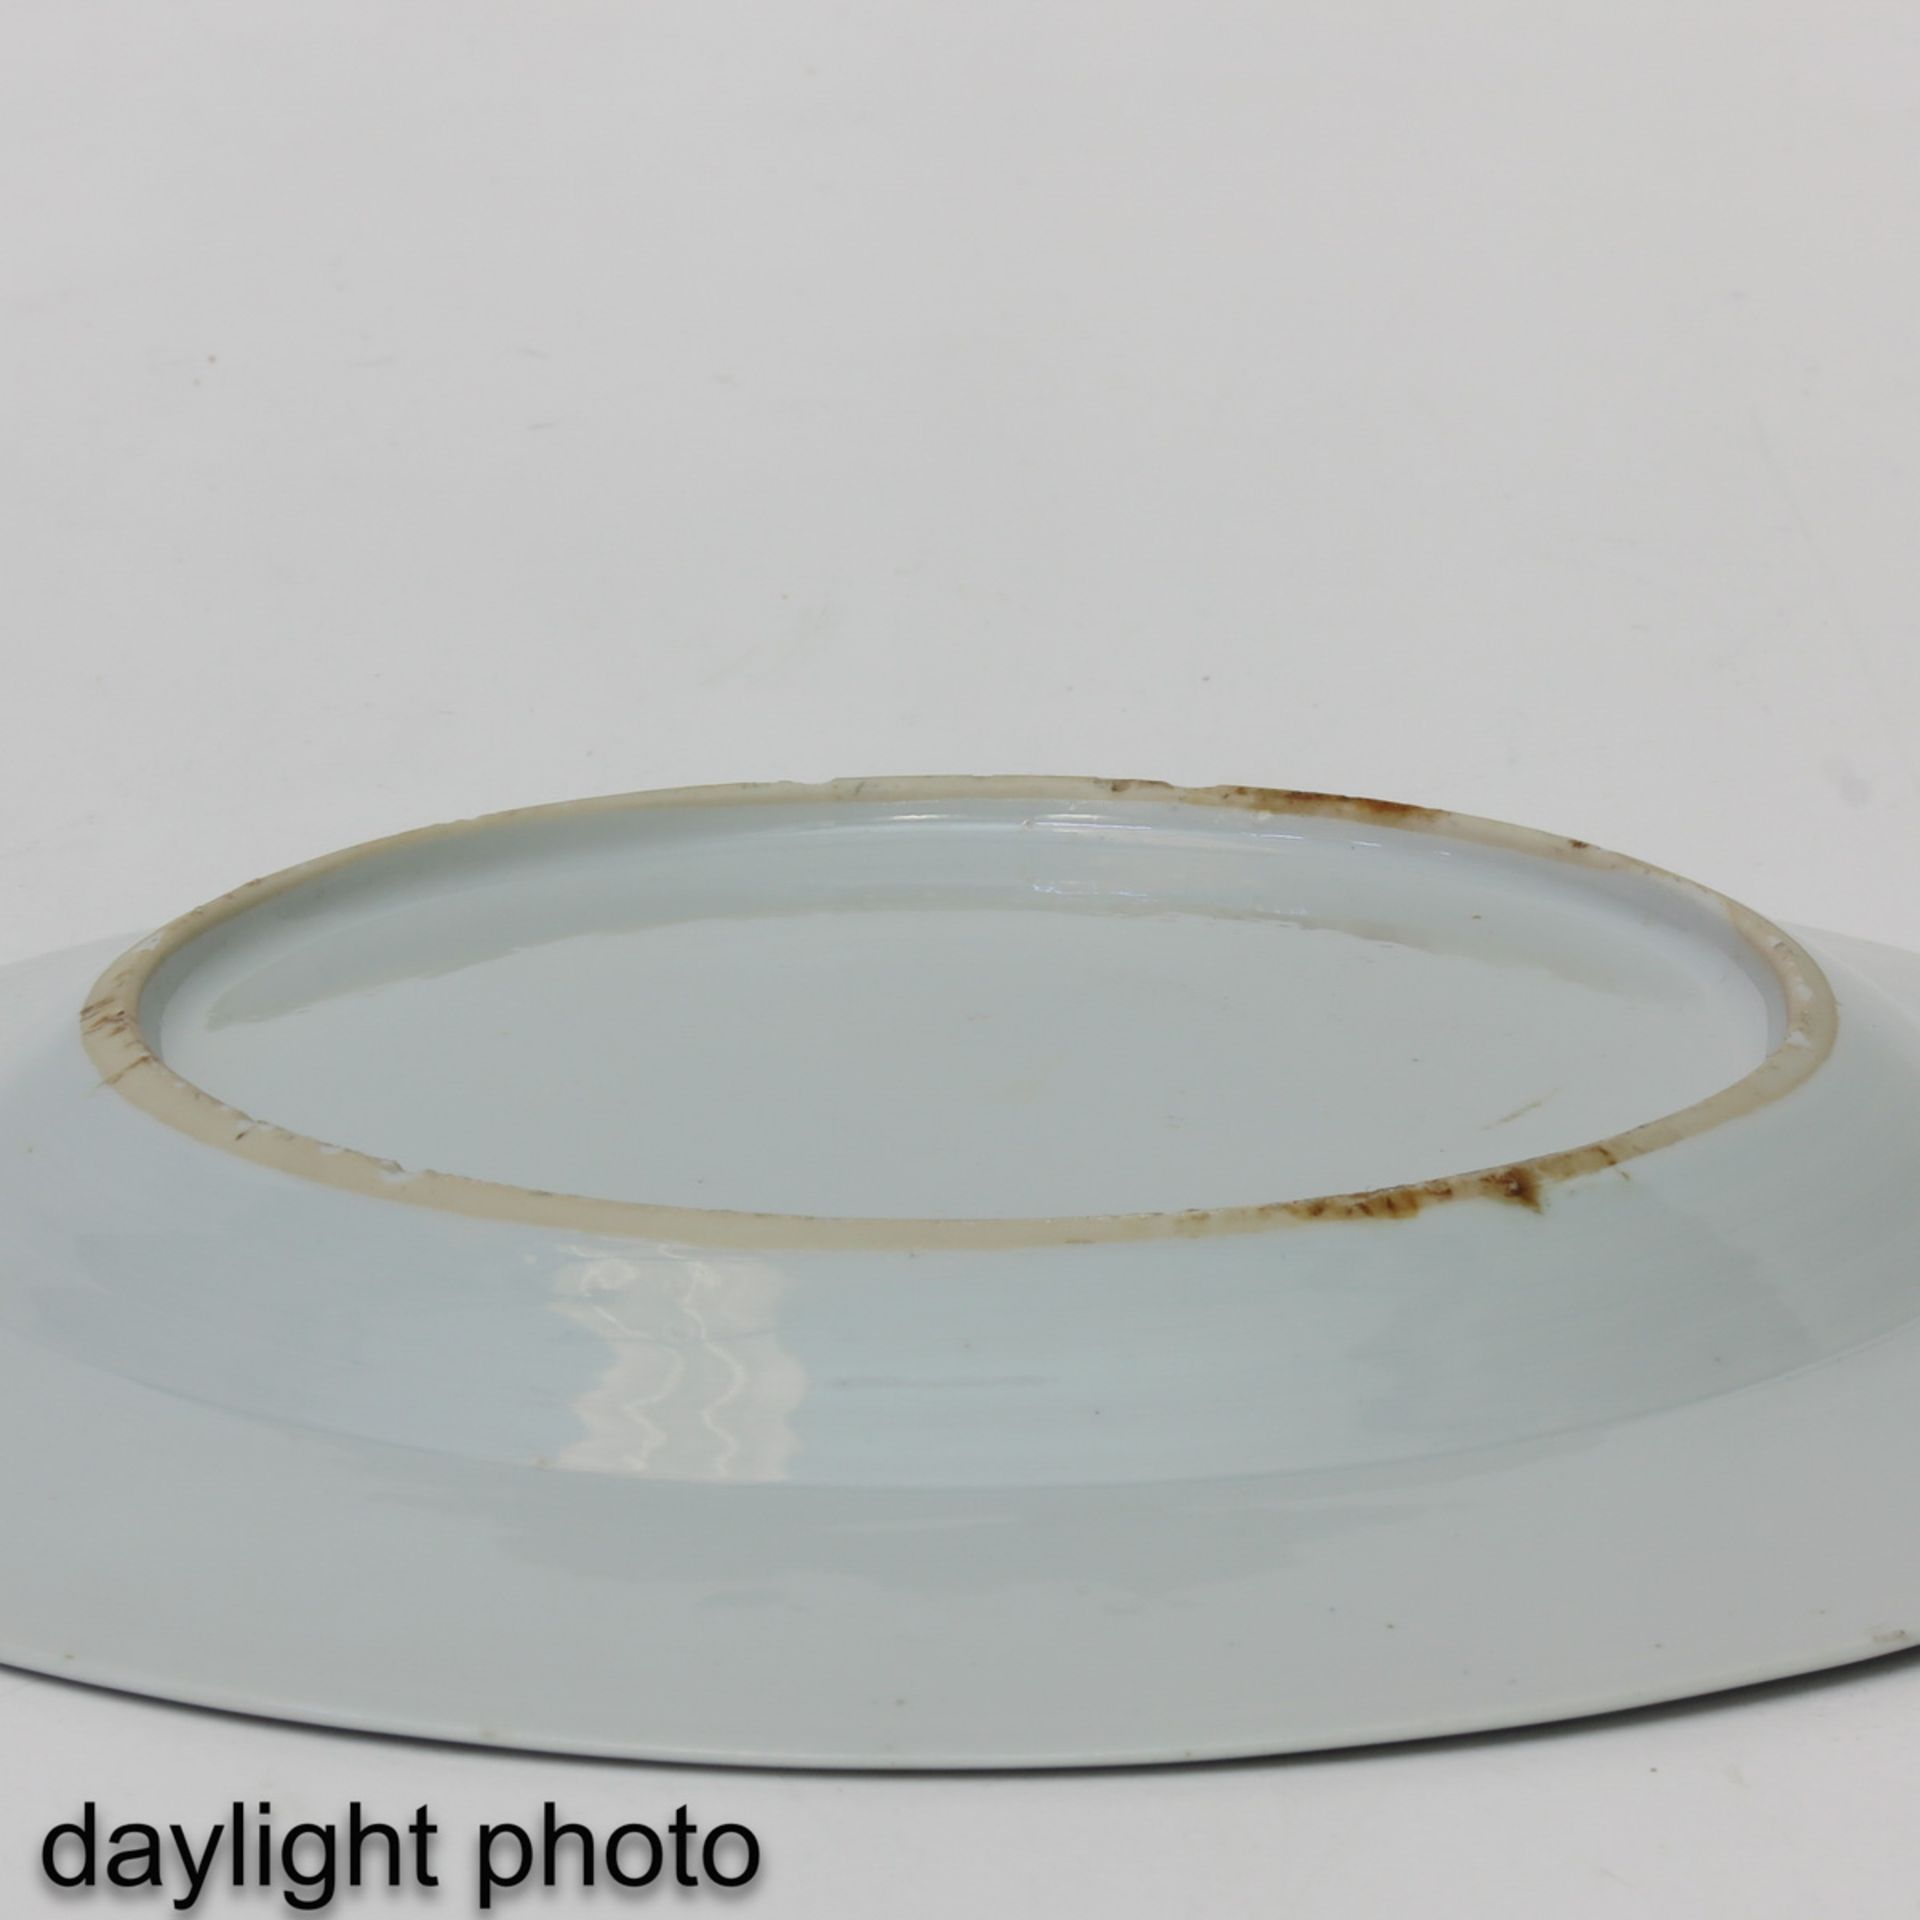 A Series of 6 Blue and White Plates - Image 10 of 10